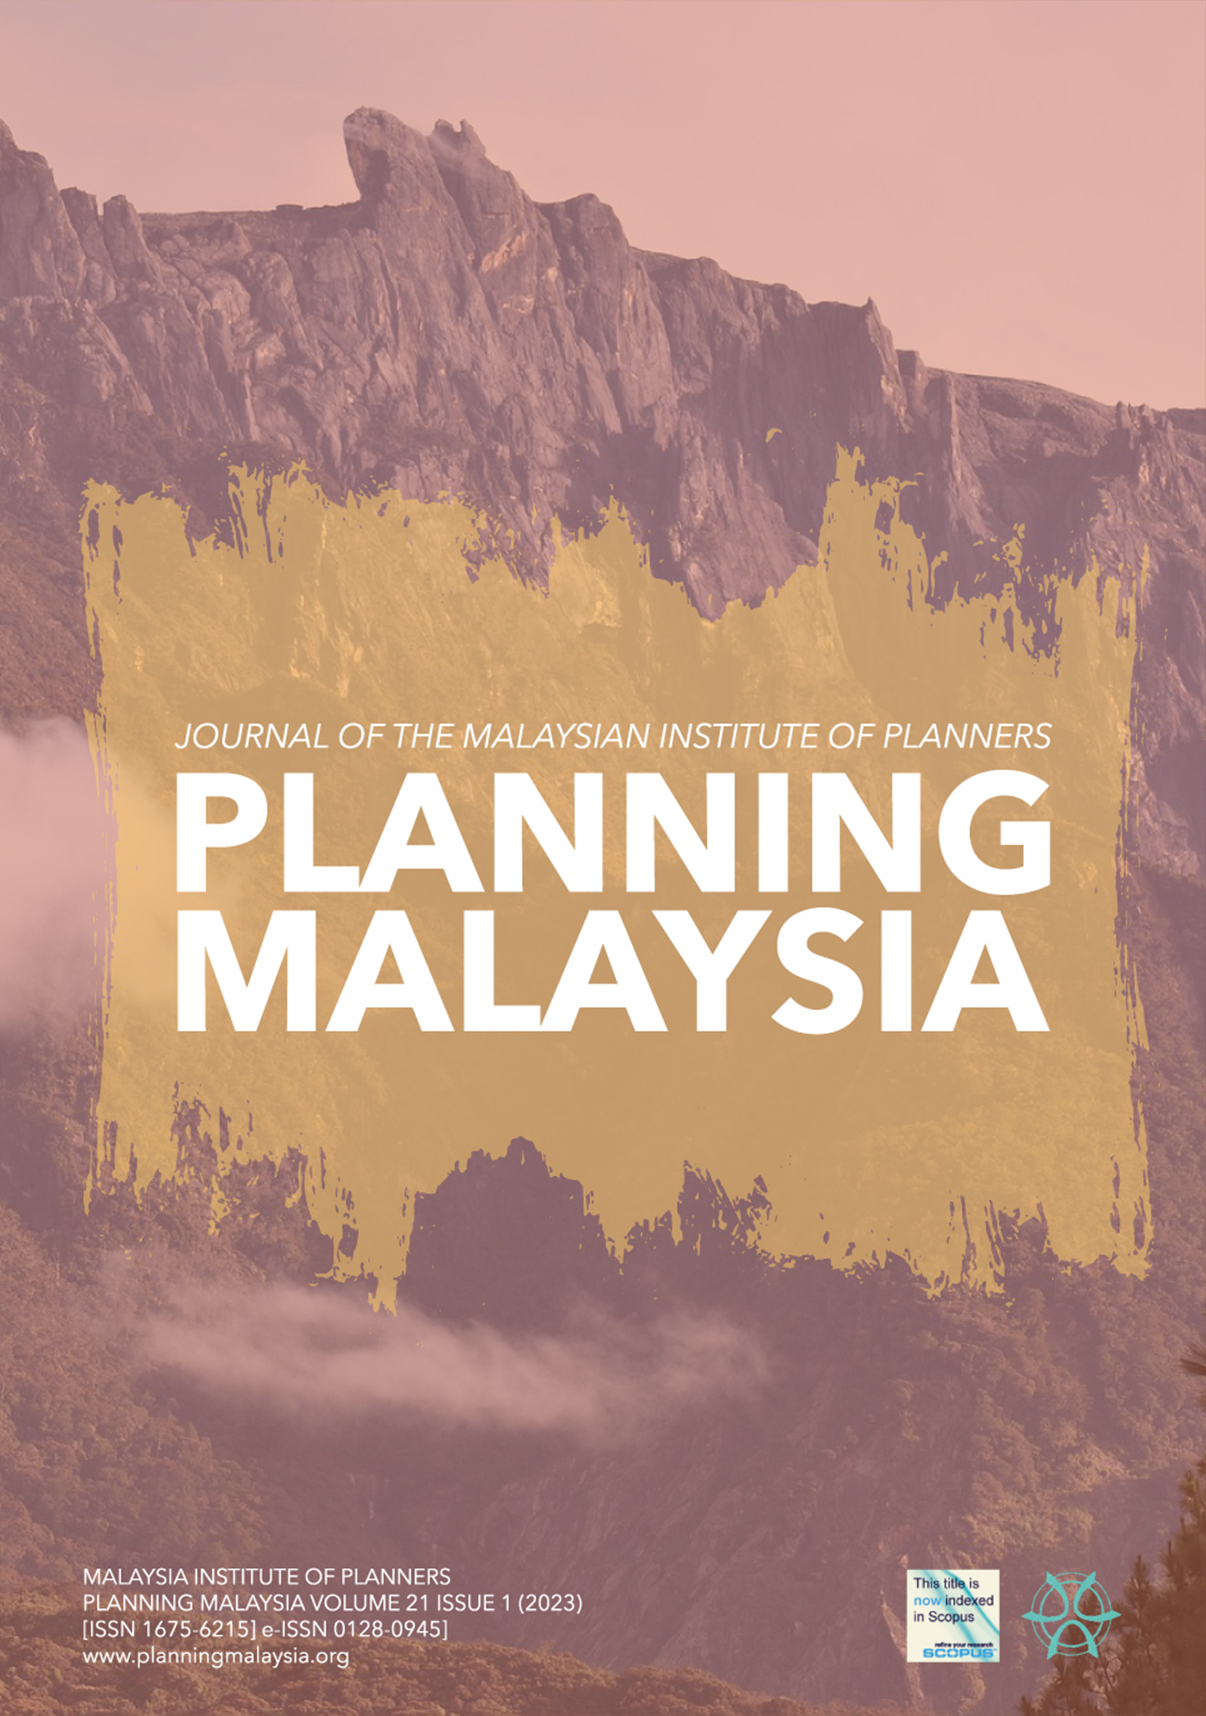 					View Vol. 21 (2023): PLANNING MALAYSIA JOURNAL : Volume 21, Issue 1, 2023
				